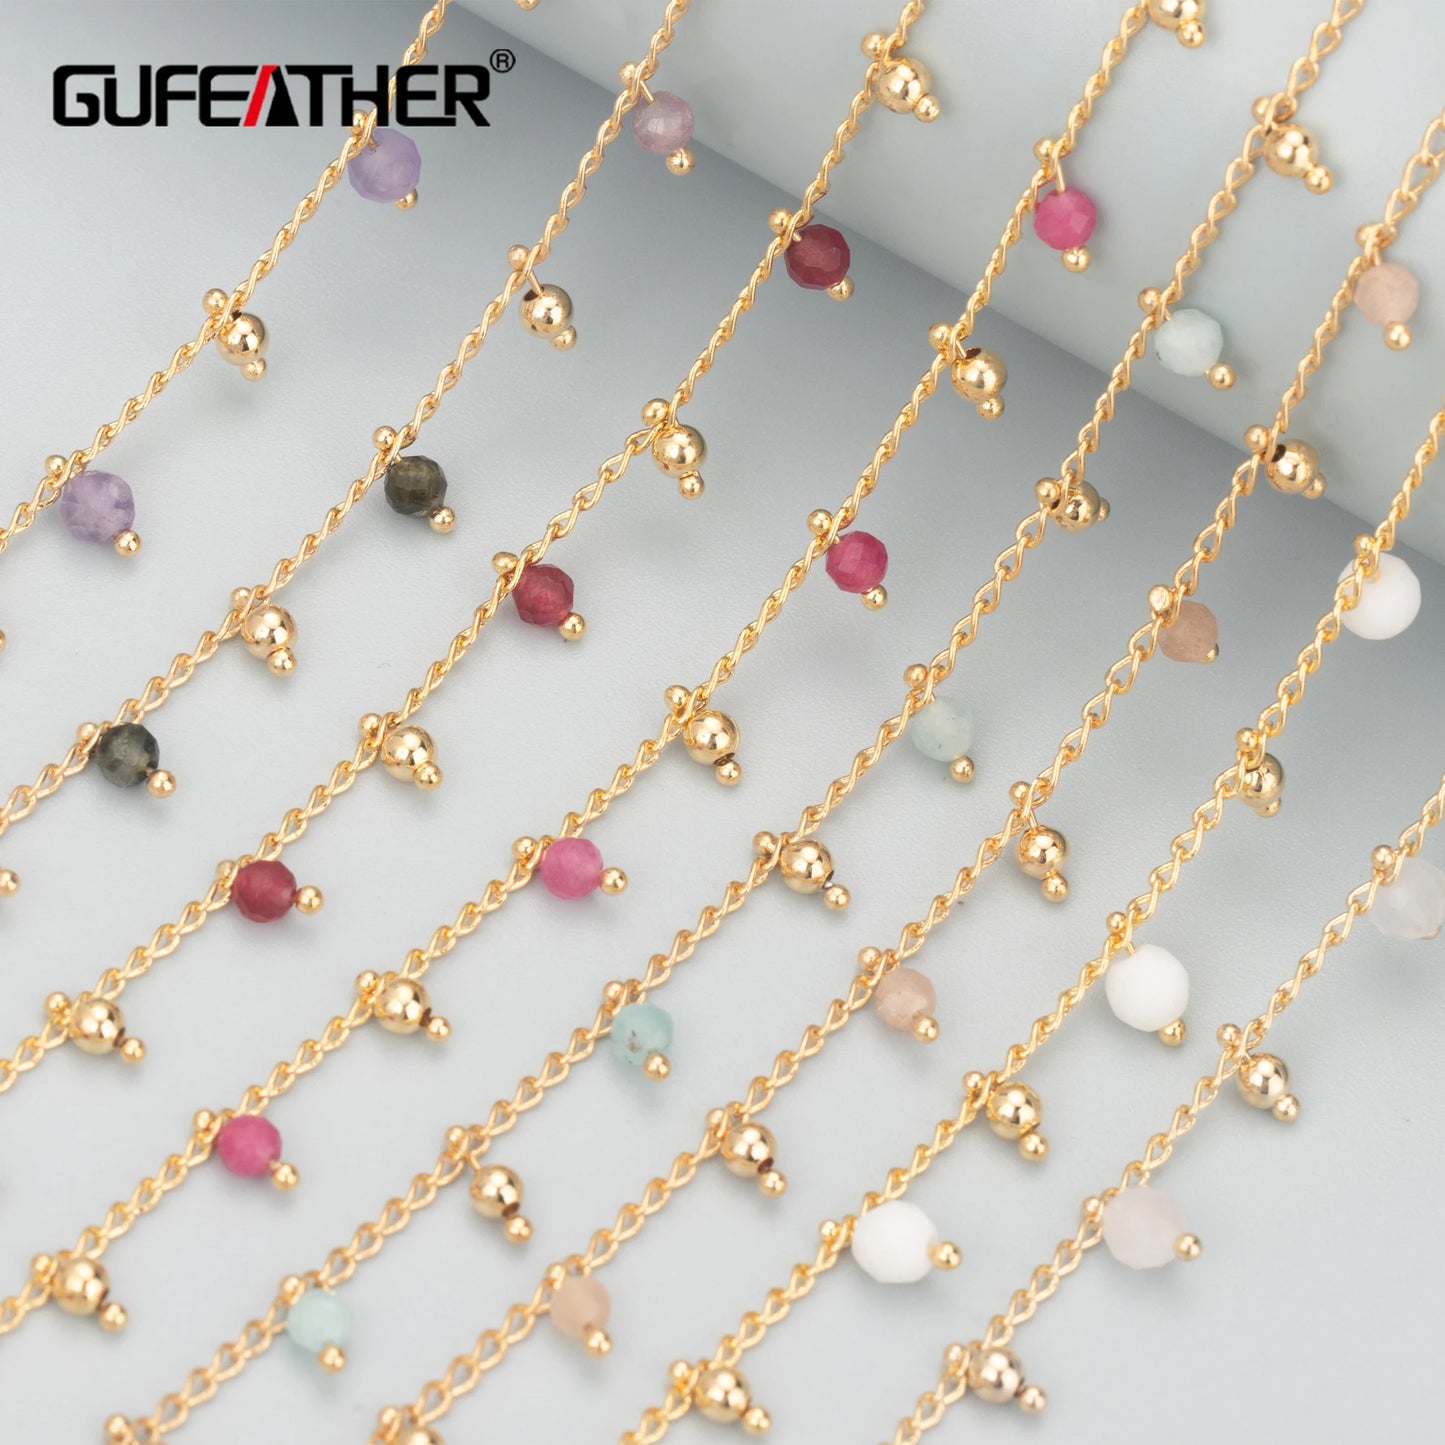 GUFEATHER C59,jewelry accessories,pass REACH,nickel free,18k gold plated,copper metal,natural stone,diy chain necklace,1m/lot